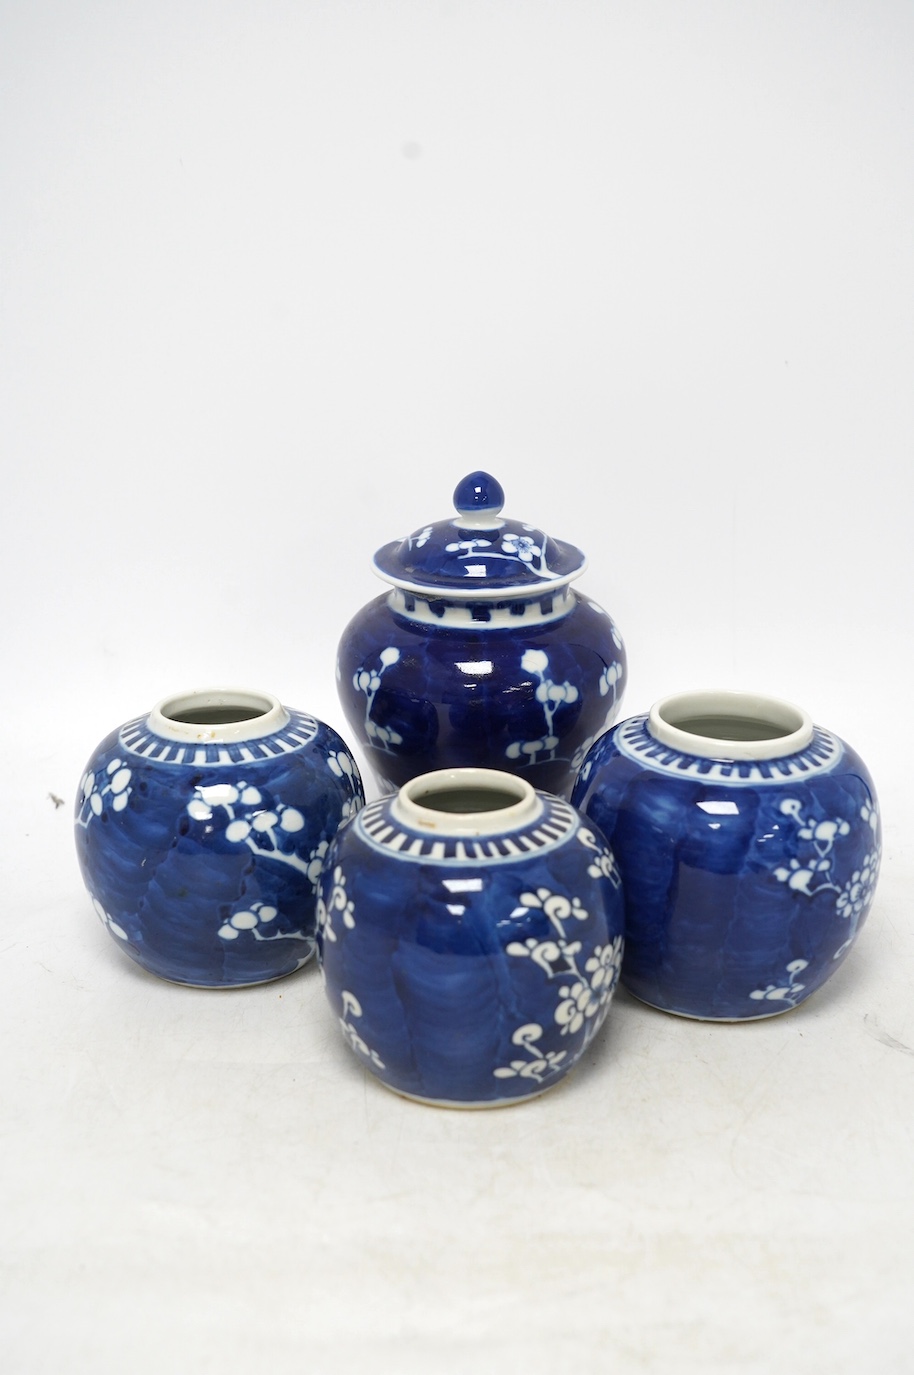 Three Chinese blue and white prunus jars and a similar vase and cover, early 20th century, vase 16.5cm high. Condition - poor as all three jars have the covers missing